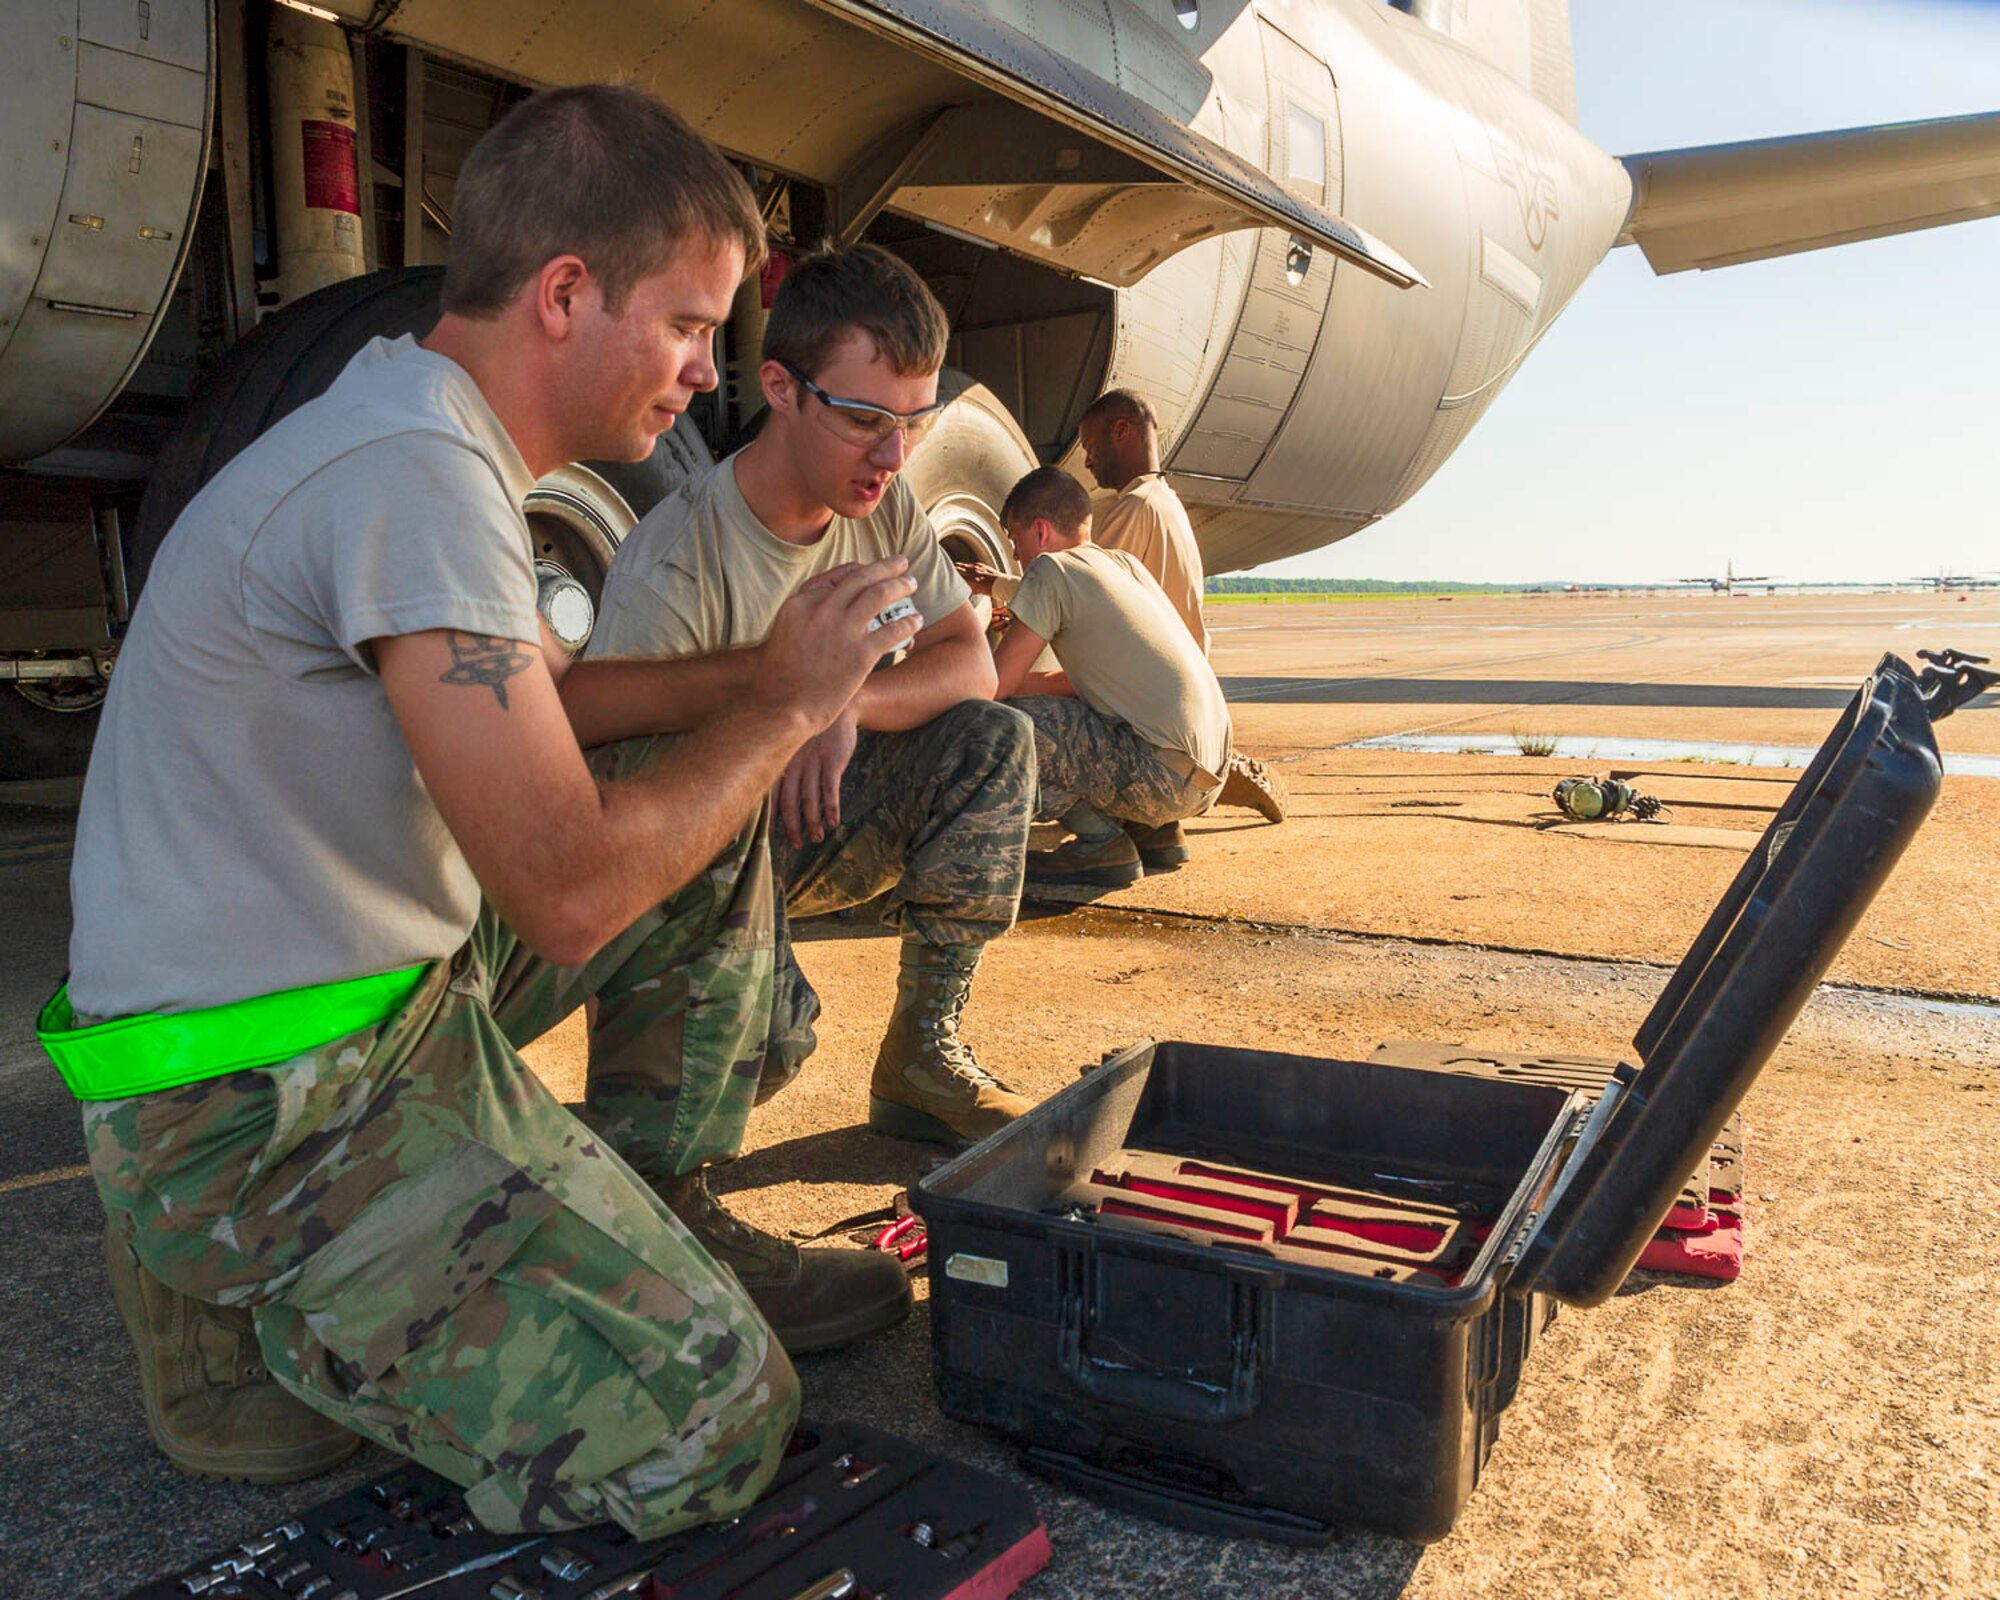 Air Force Reserve Airmen from the 913th Maintenance Squadron work with 19th Airlift Wing active duty members to troubleshoot the landing gear of a C-130J Hercules on August 15, 2019, at Little Rock Air Force Base, Ark.  There are 20 Reserve members who work with Team Little Rock maintenance personnel to ensure combat airlift is available. Mobility aircraft, such as the C-130J, deliver critical personnel and cargo and provide airdrop of time-sensitive supplies, food and ammunition on a global scale. A critical part of the airlift capabilities are the efforts of the maintenance personnel who ensure the workhorse of the mobility force, the C-130, is always ready, always there! (U.S. Air Force Reserve photo by Maj. Ashley Walker)